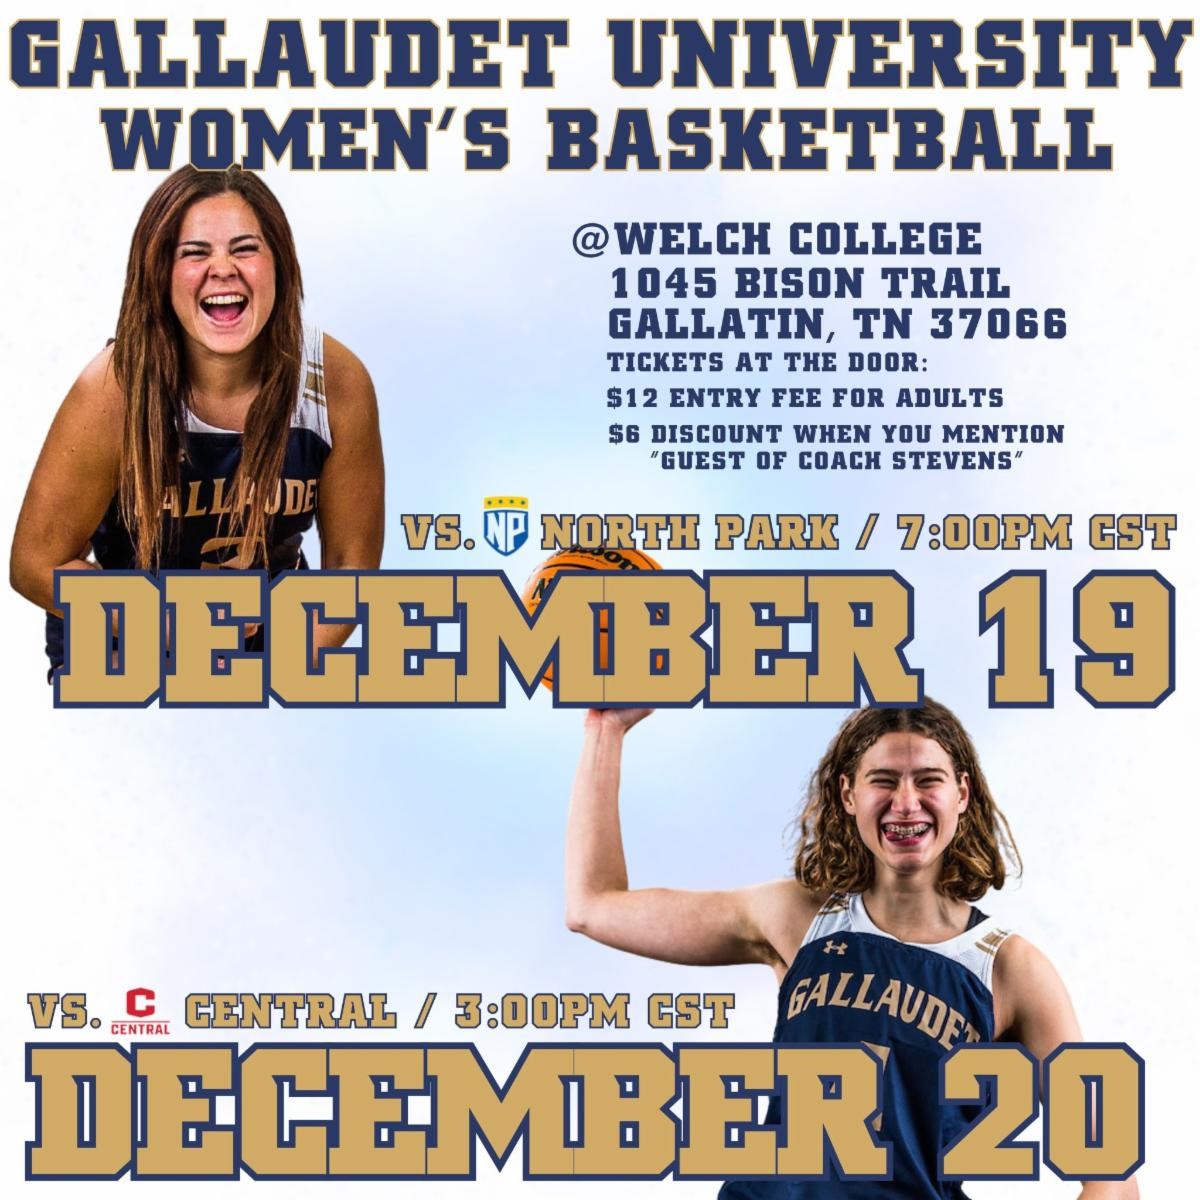 Flyer with two college female basketball players with information about the games